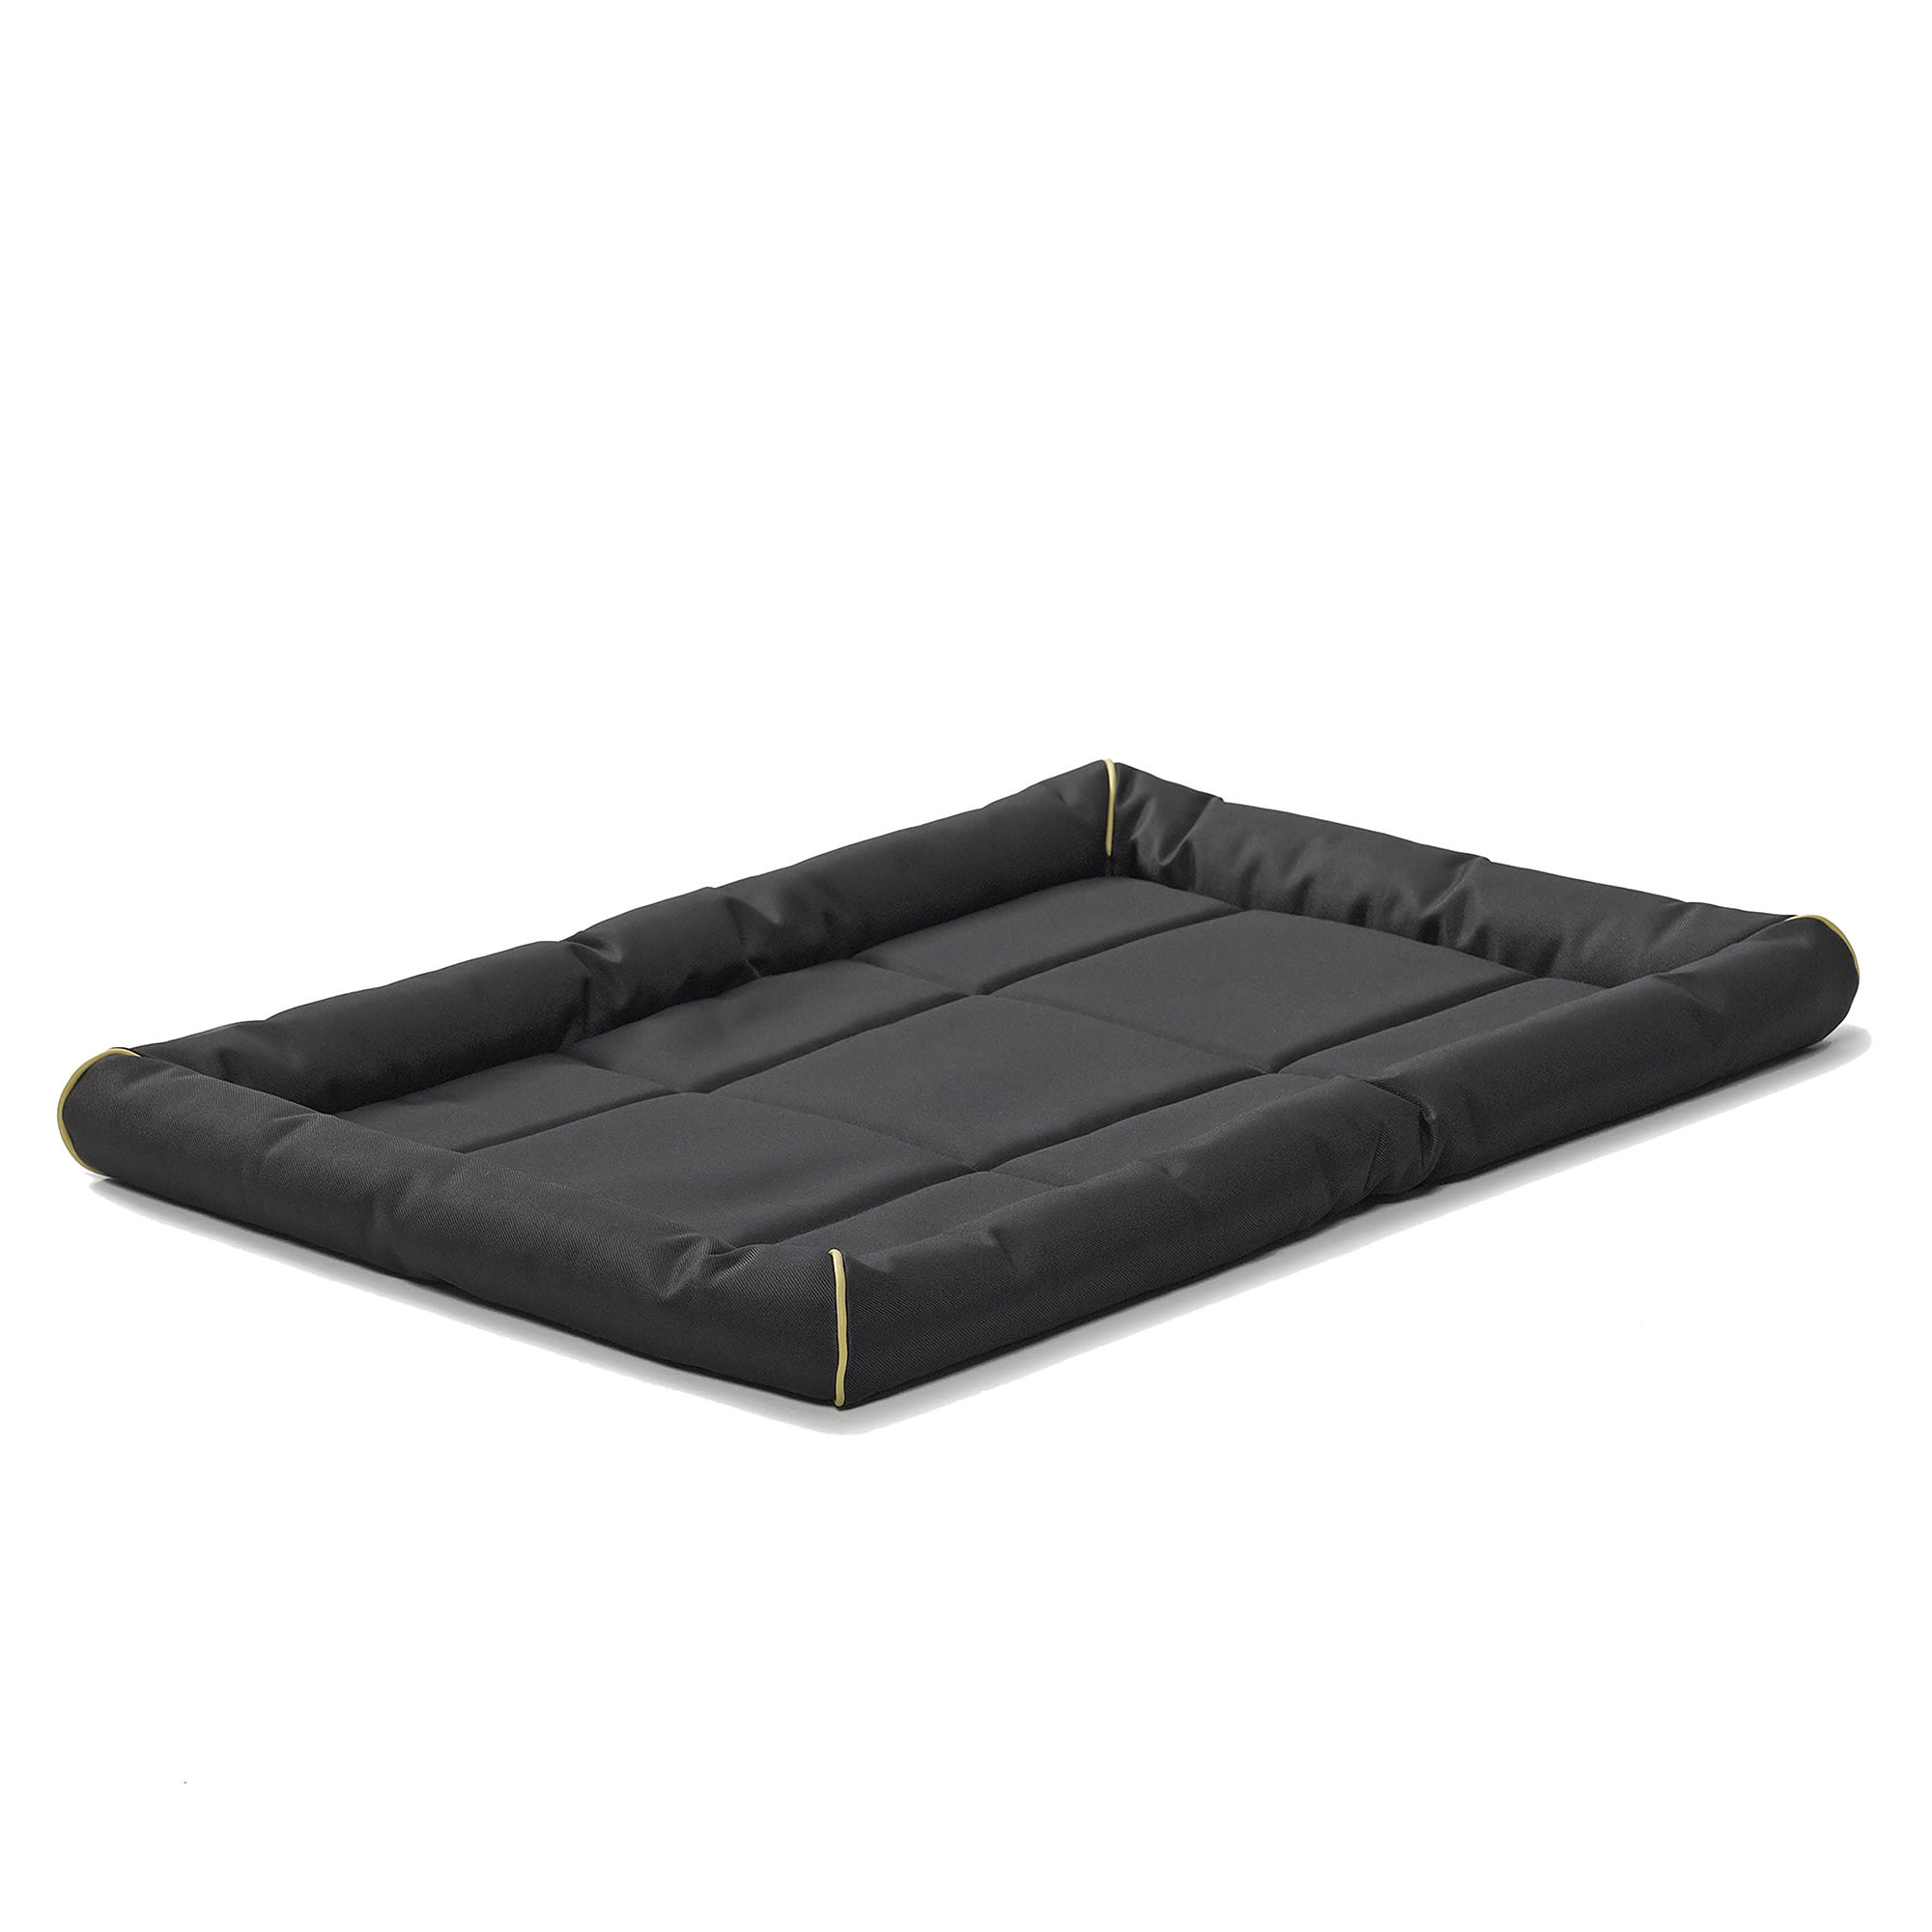 Photos - Bed & Furniture Midwest Quiet Time Maxx Black Dog Bed, 48.5" L X 31" W, X-Large, B 